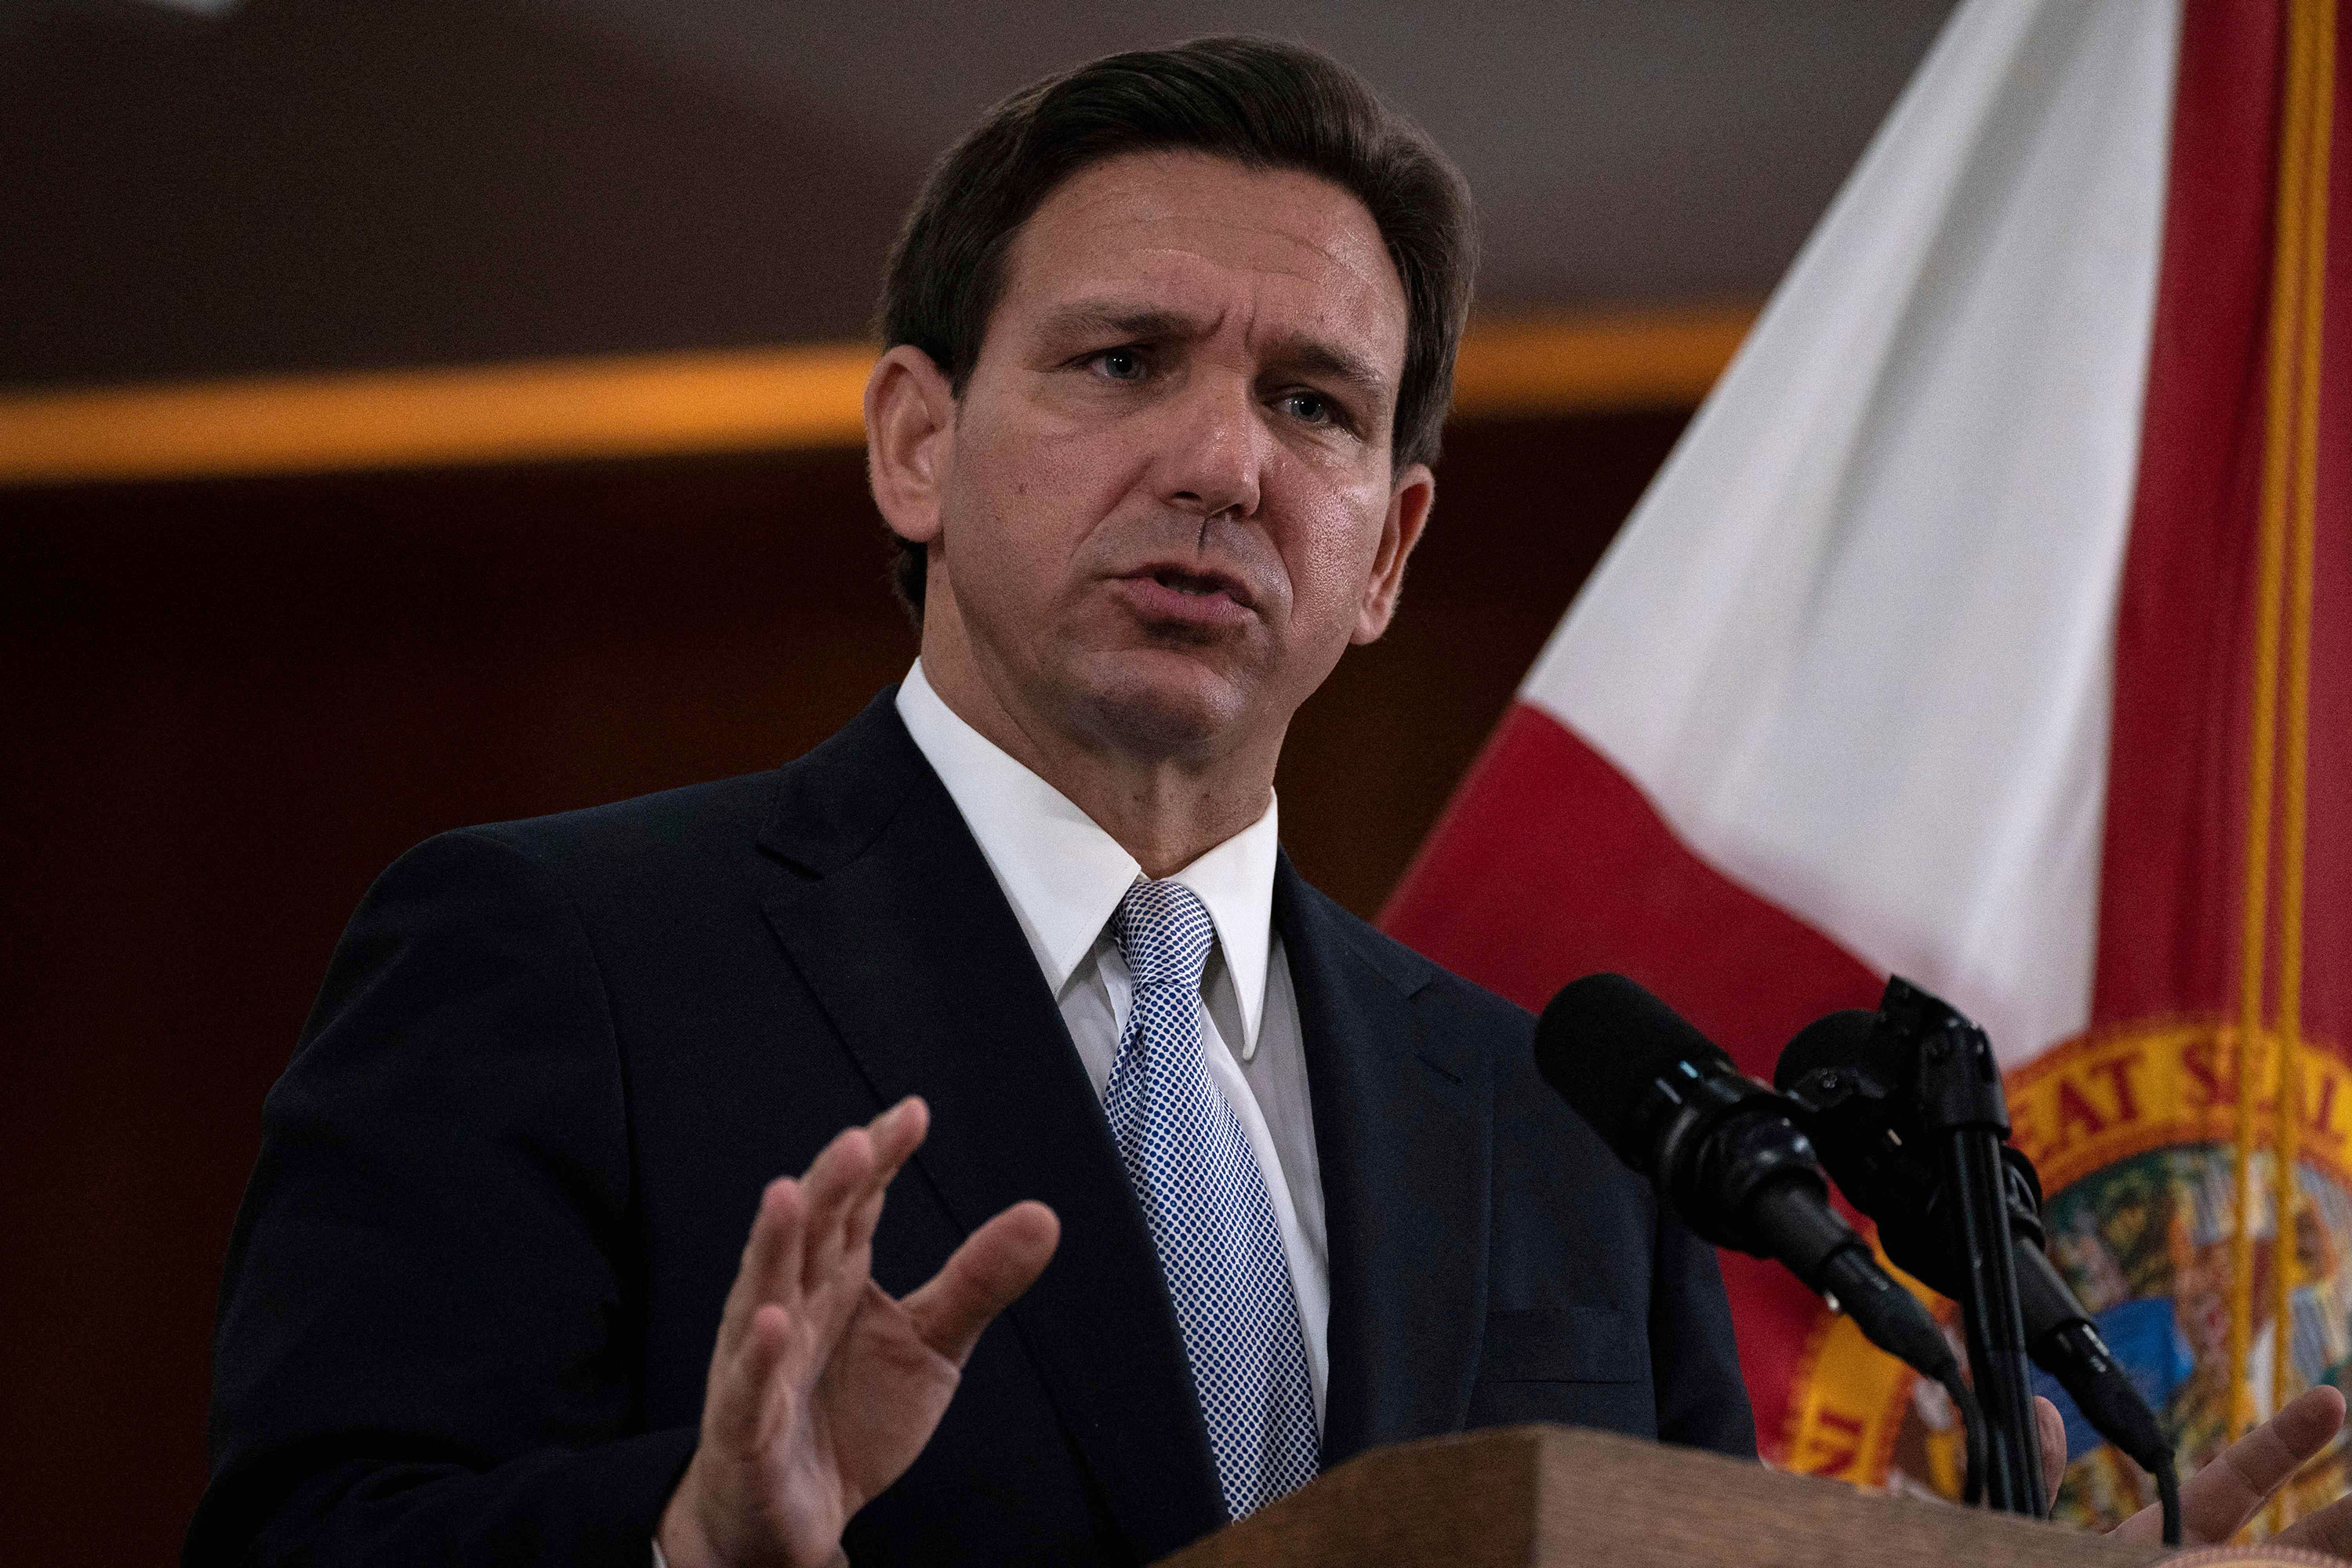 Florida Gov. Ron DeSantis answers questions from the media at the Florida State Capitol in Tallahassee, Florida, on March 7. 